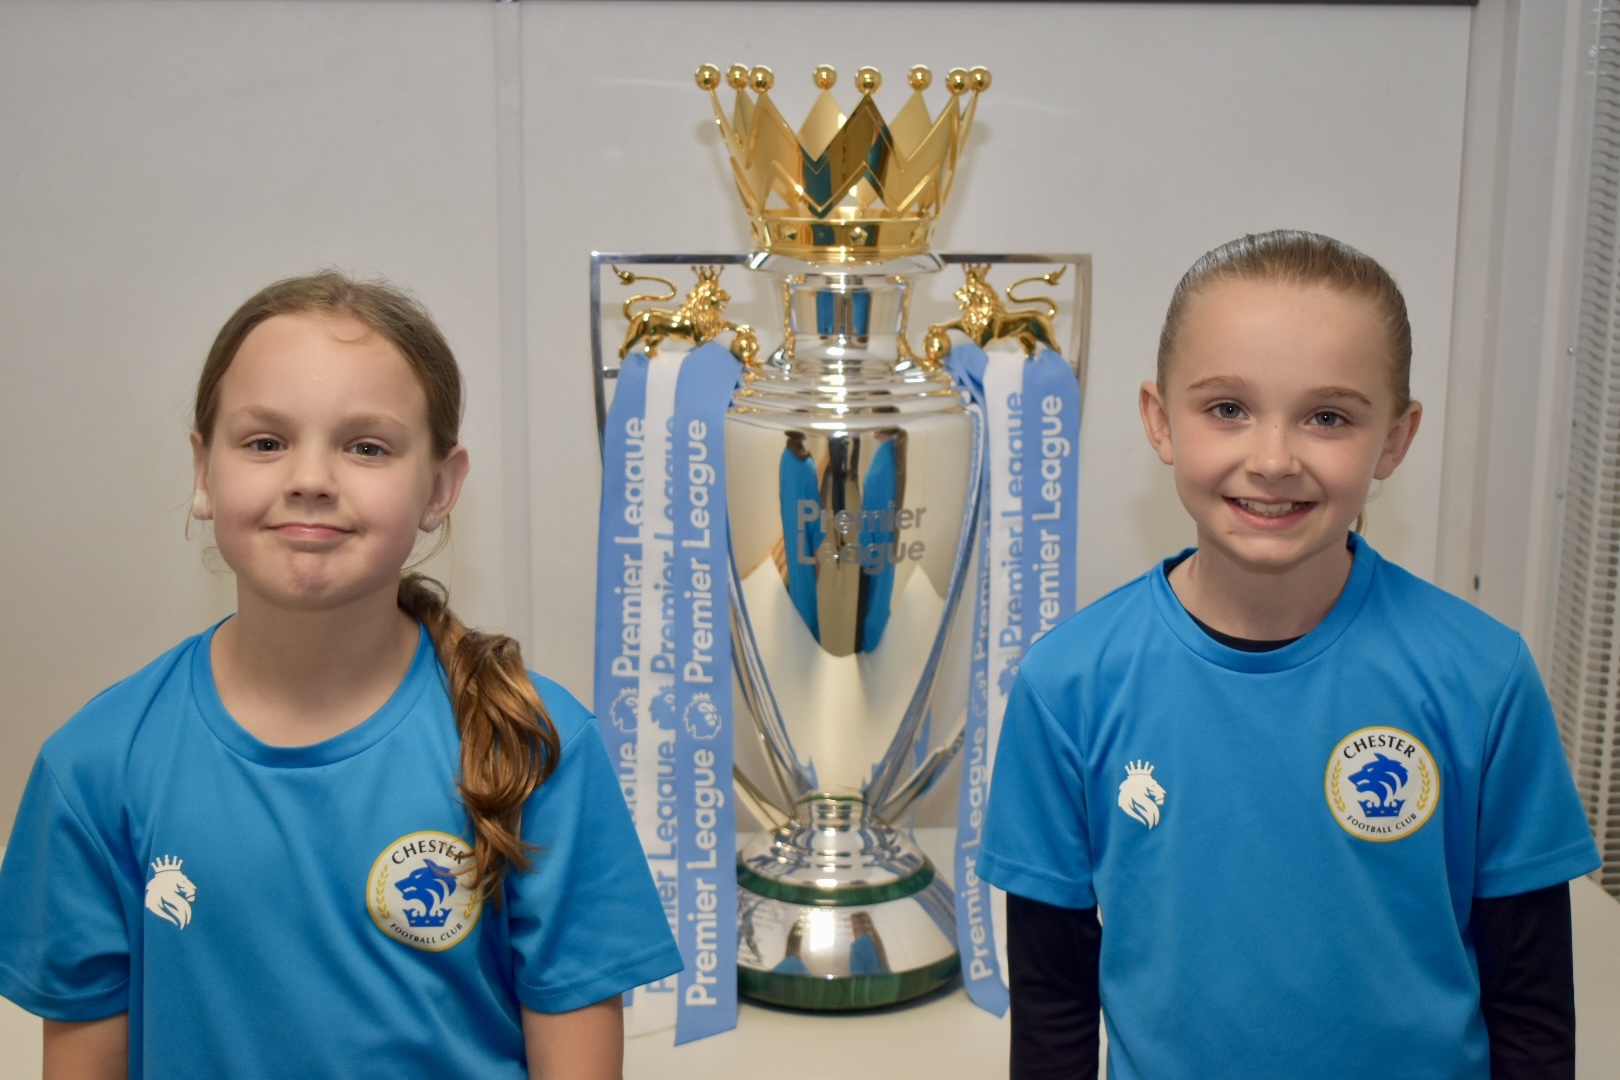 Players and families enjoyed their chance to be pictured with the Premier League trophy and the UEFA Womens Euro trophy at Chester FC Girls Emerging Talent Centre.